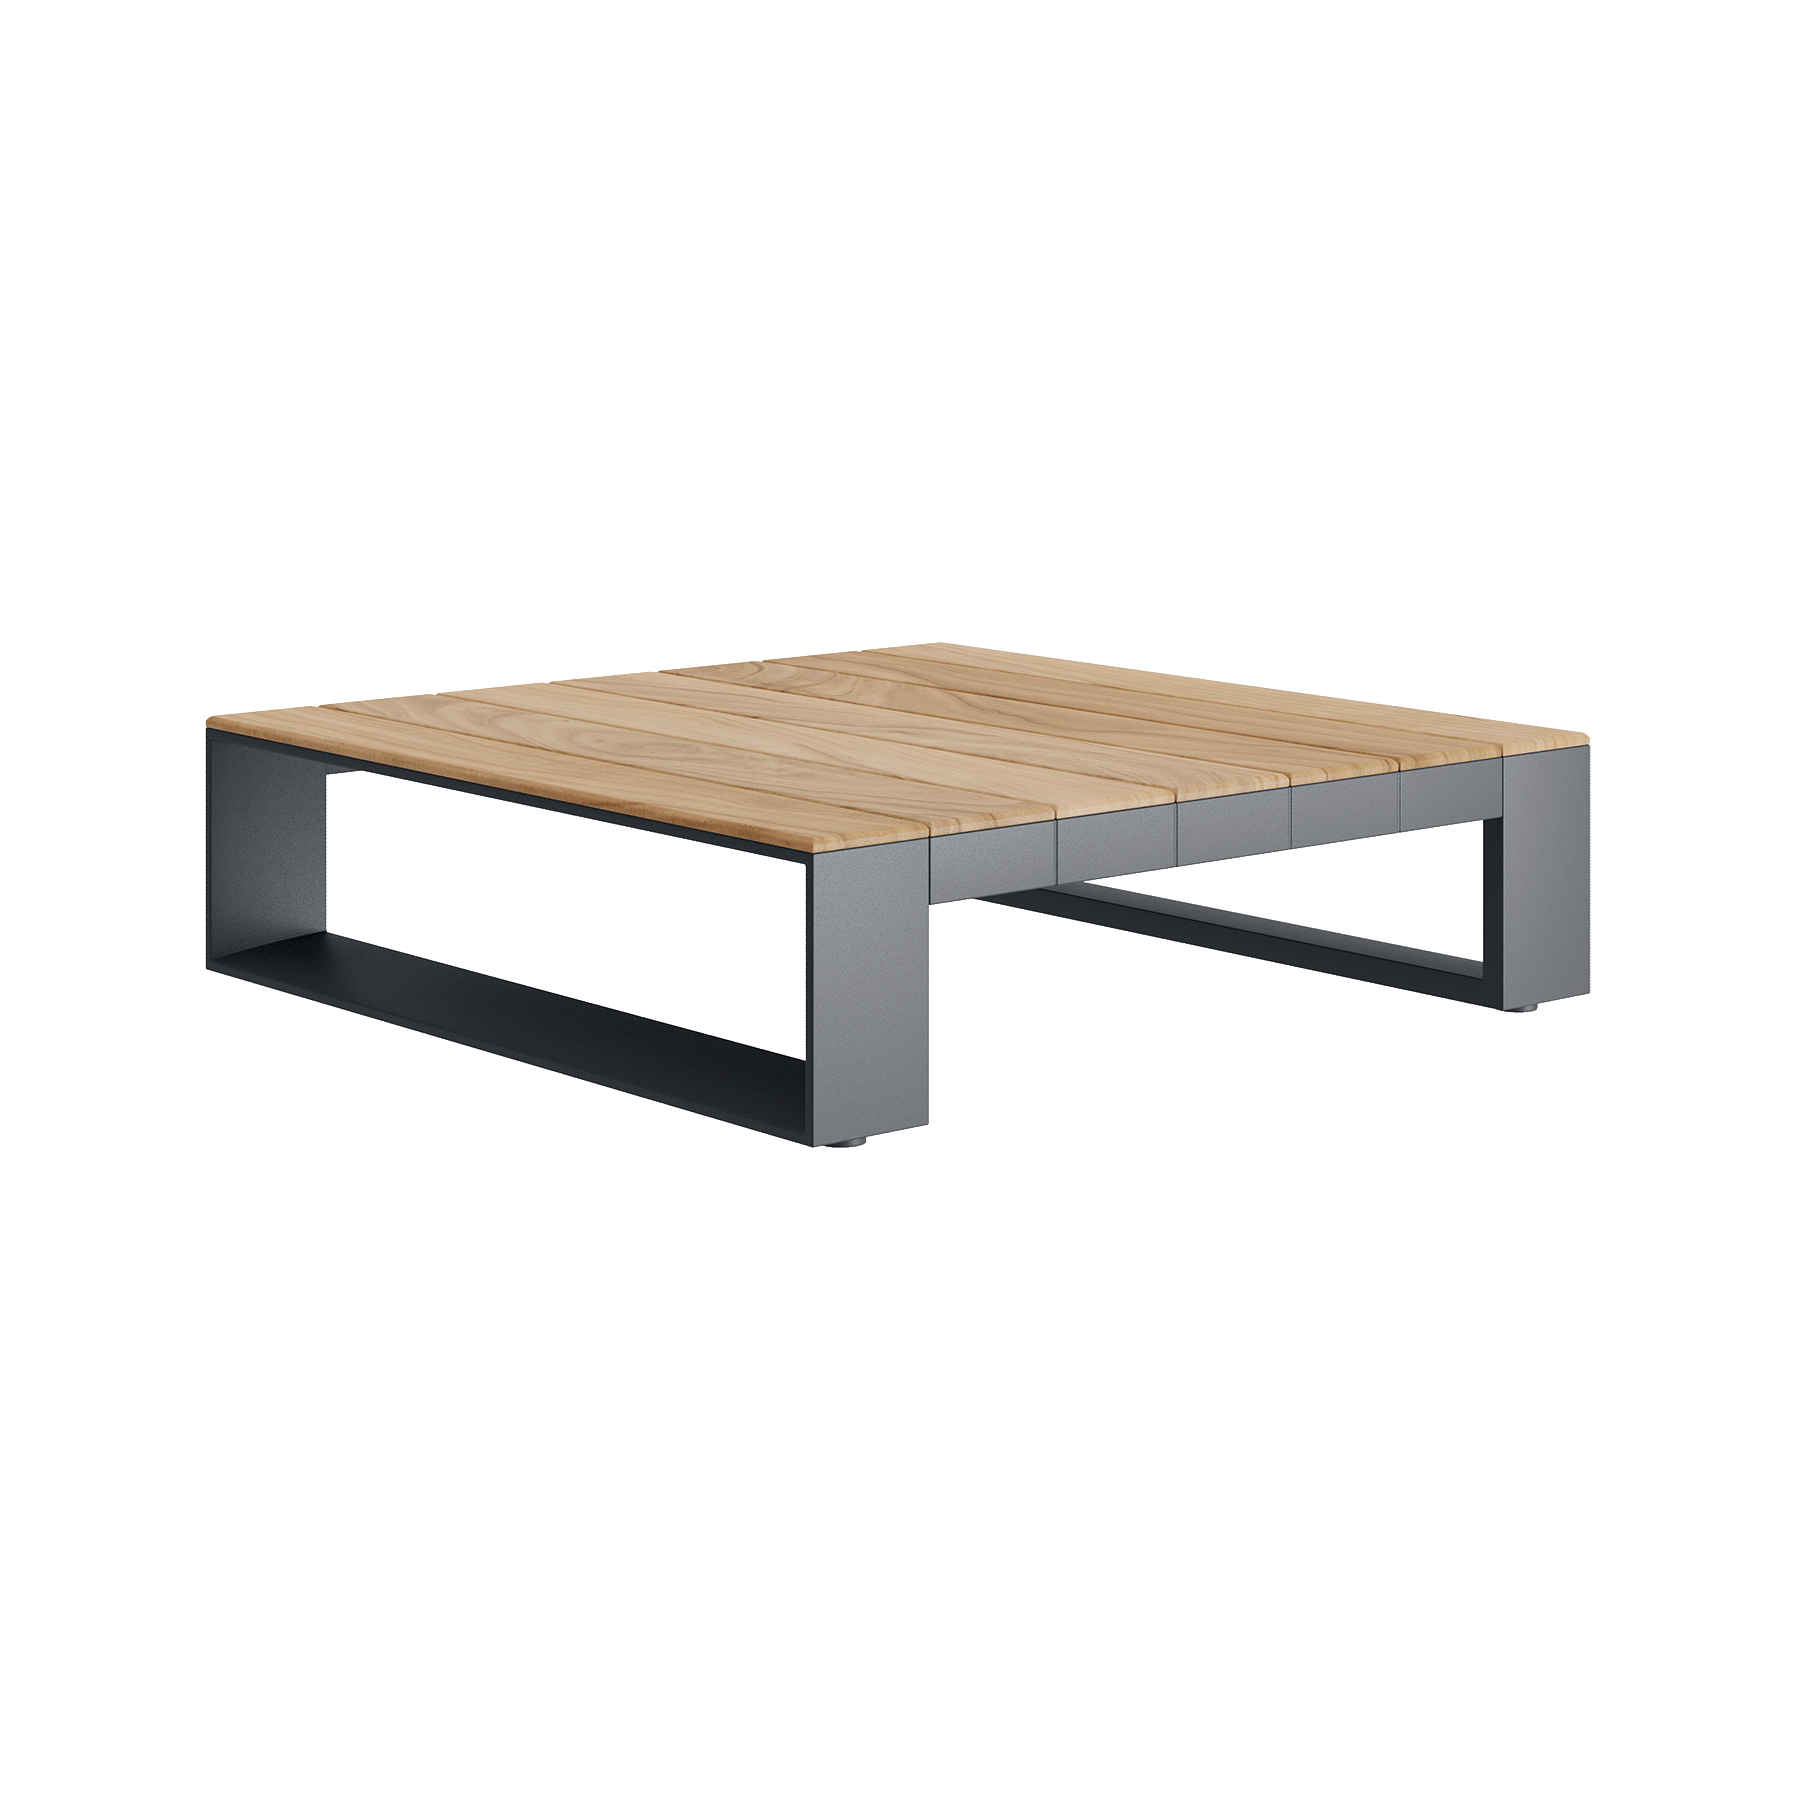 N5 square coffee table product image uk garden furniture